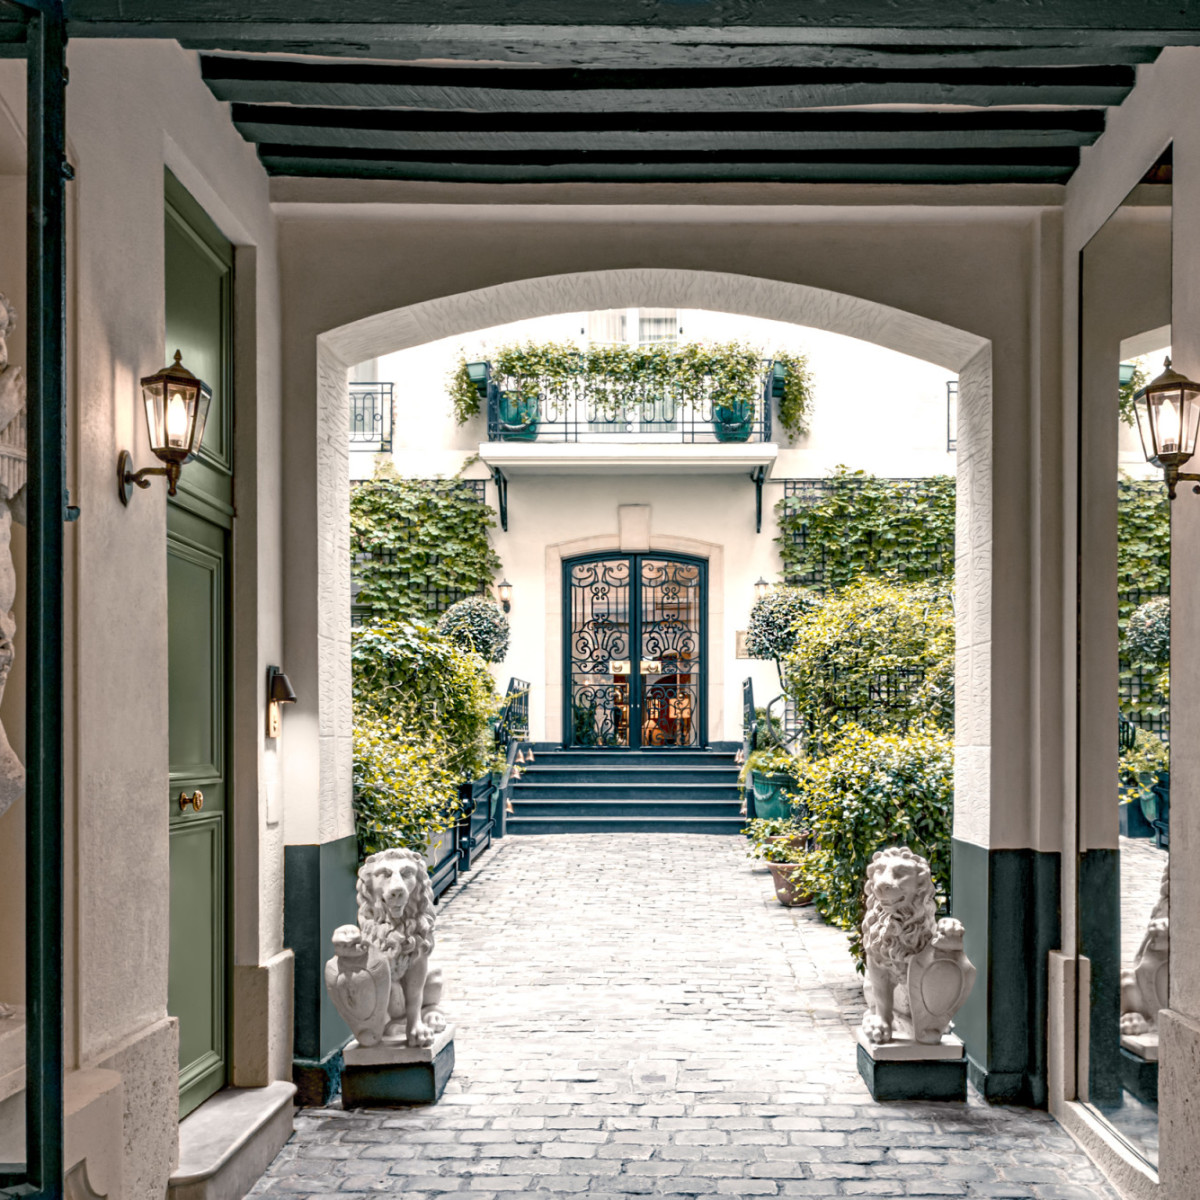 The chic entryway of Relais Christine, in Paris, with white statues and well-groomed greenery